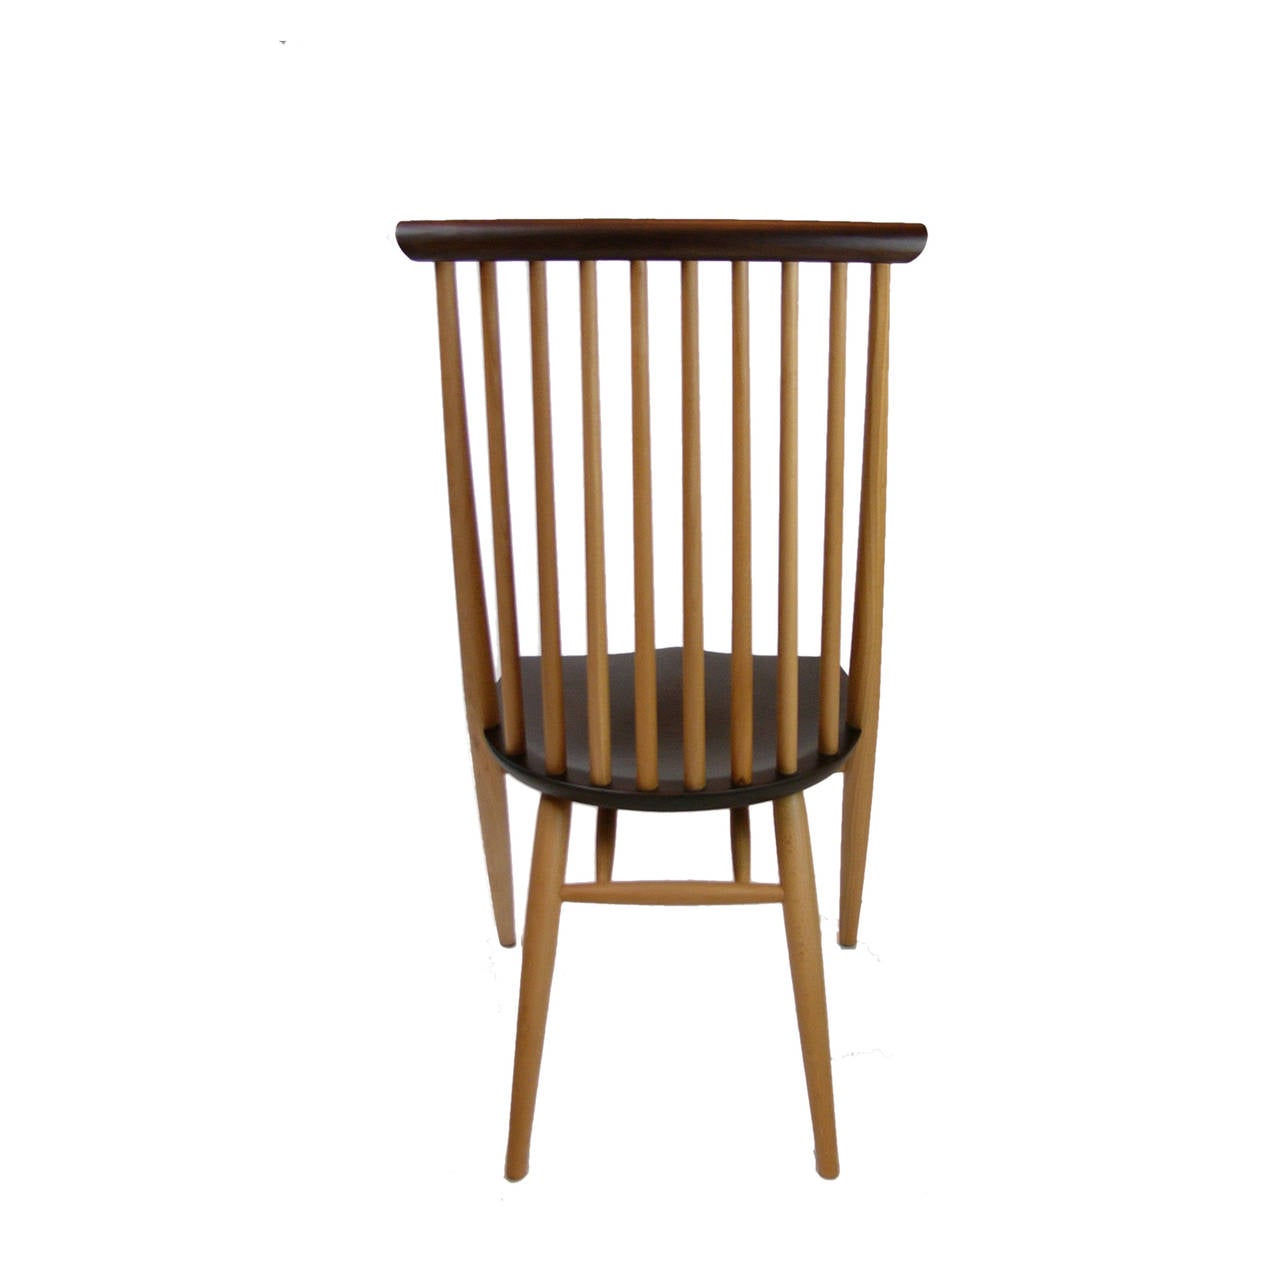 Stunning Handcrafted Tateishi Shoiji Dining Chairs in Walnut and Oak 1